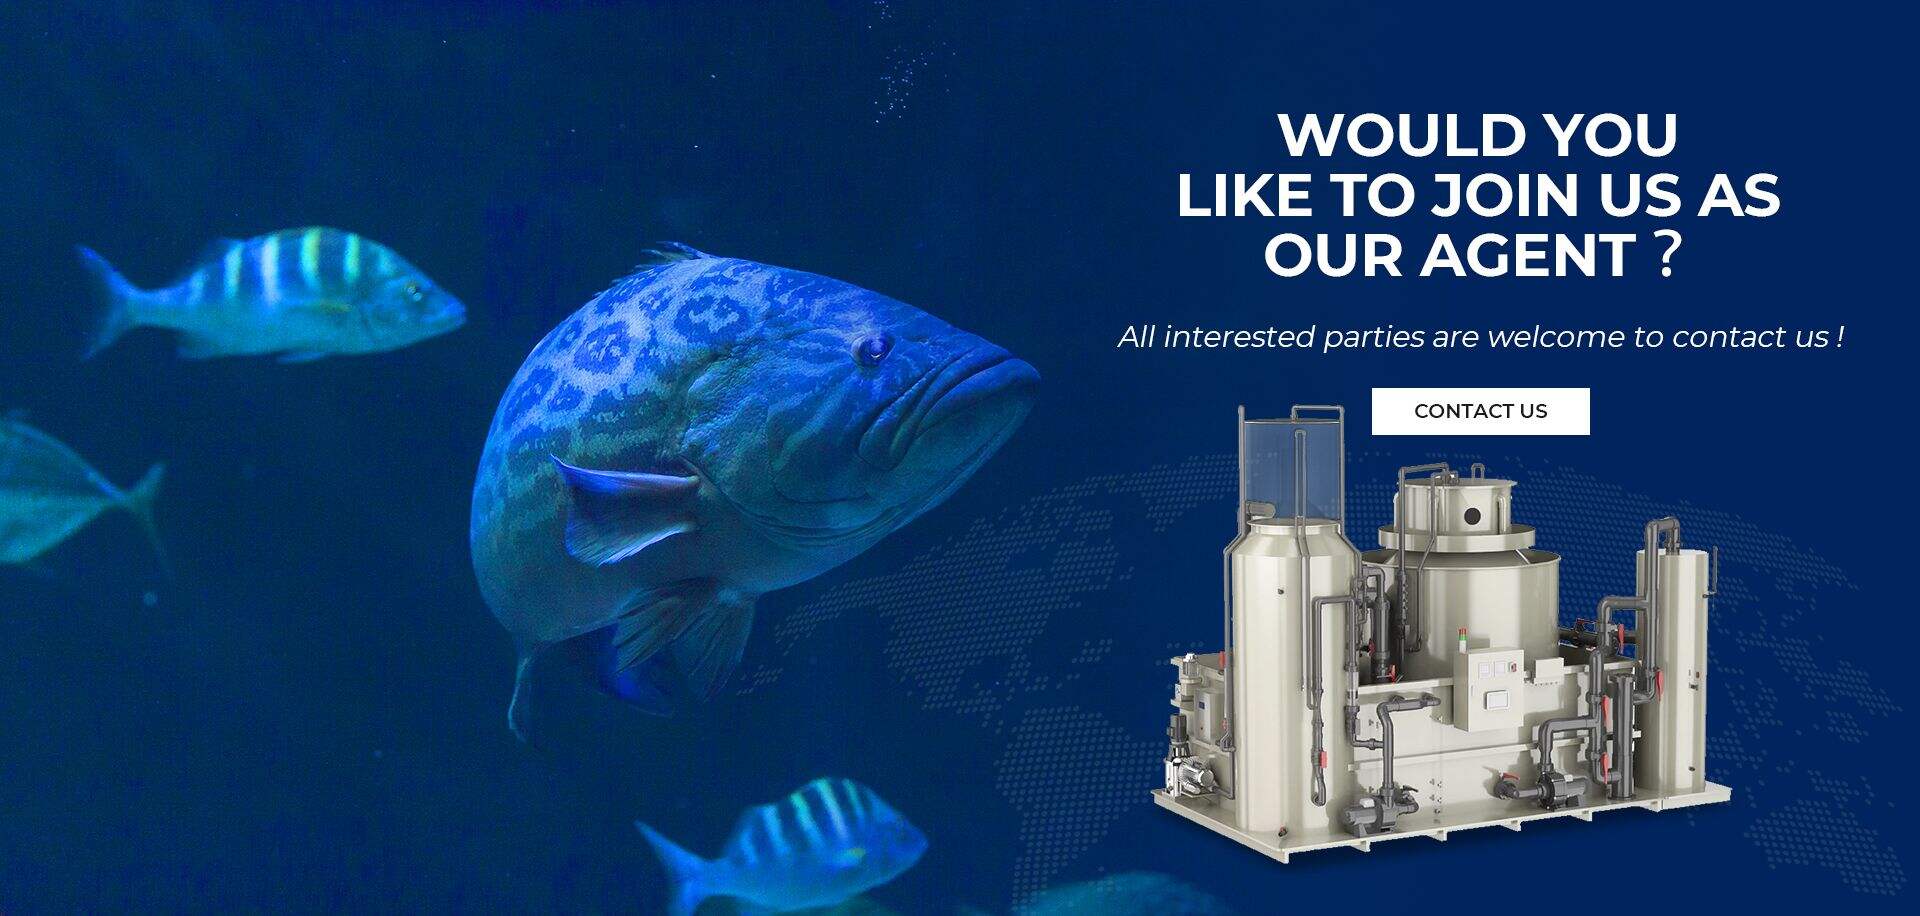 eWater Aquacultuurapparatuur Technology Limited